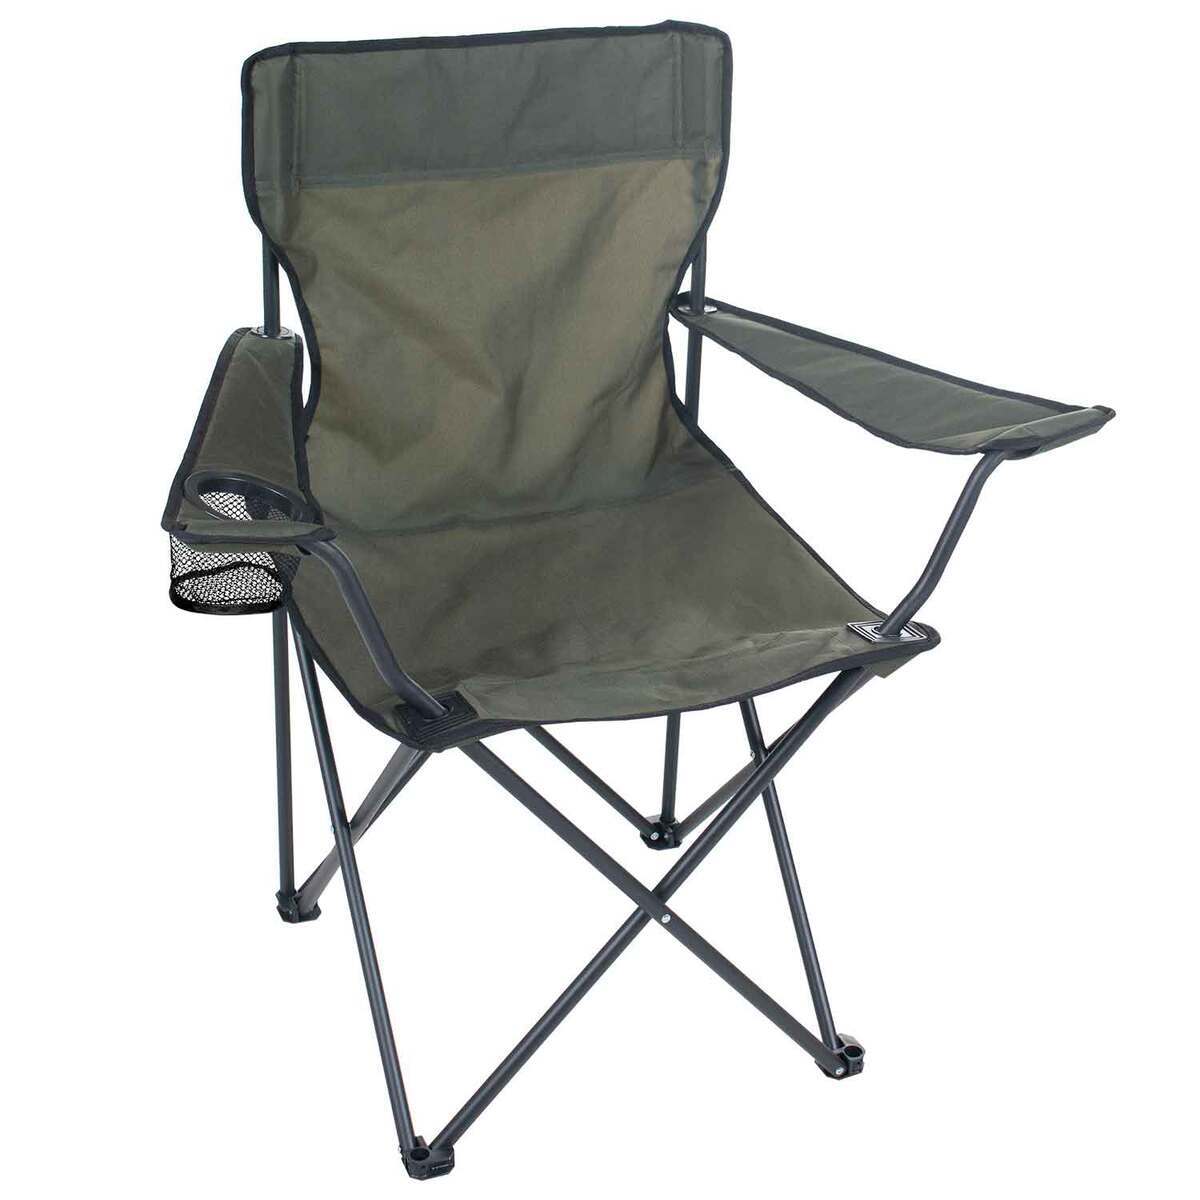 Vintage The Ultimate Fishing Chair folding Camp Lawn Chair with tackle box